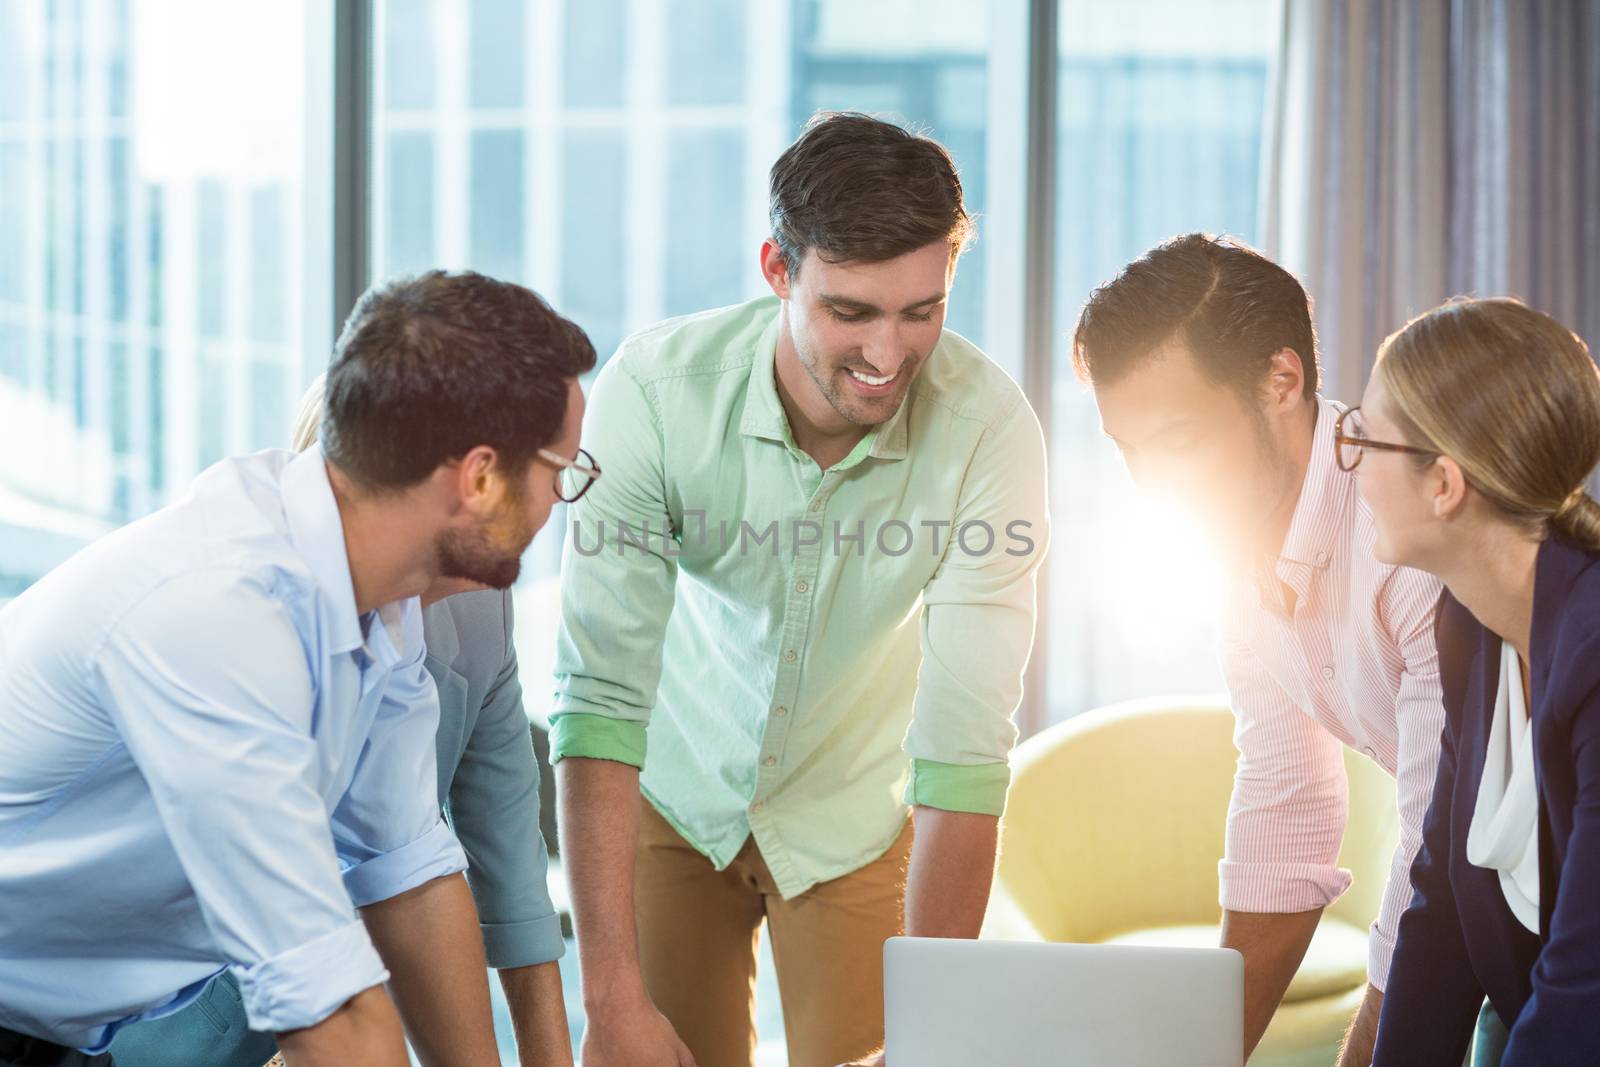 Business people during a meeting in the office